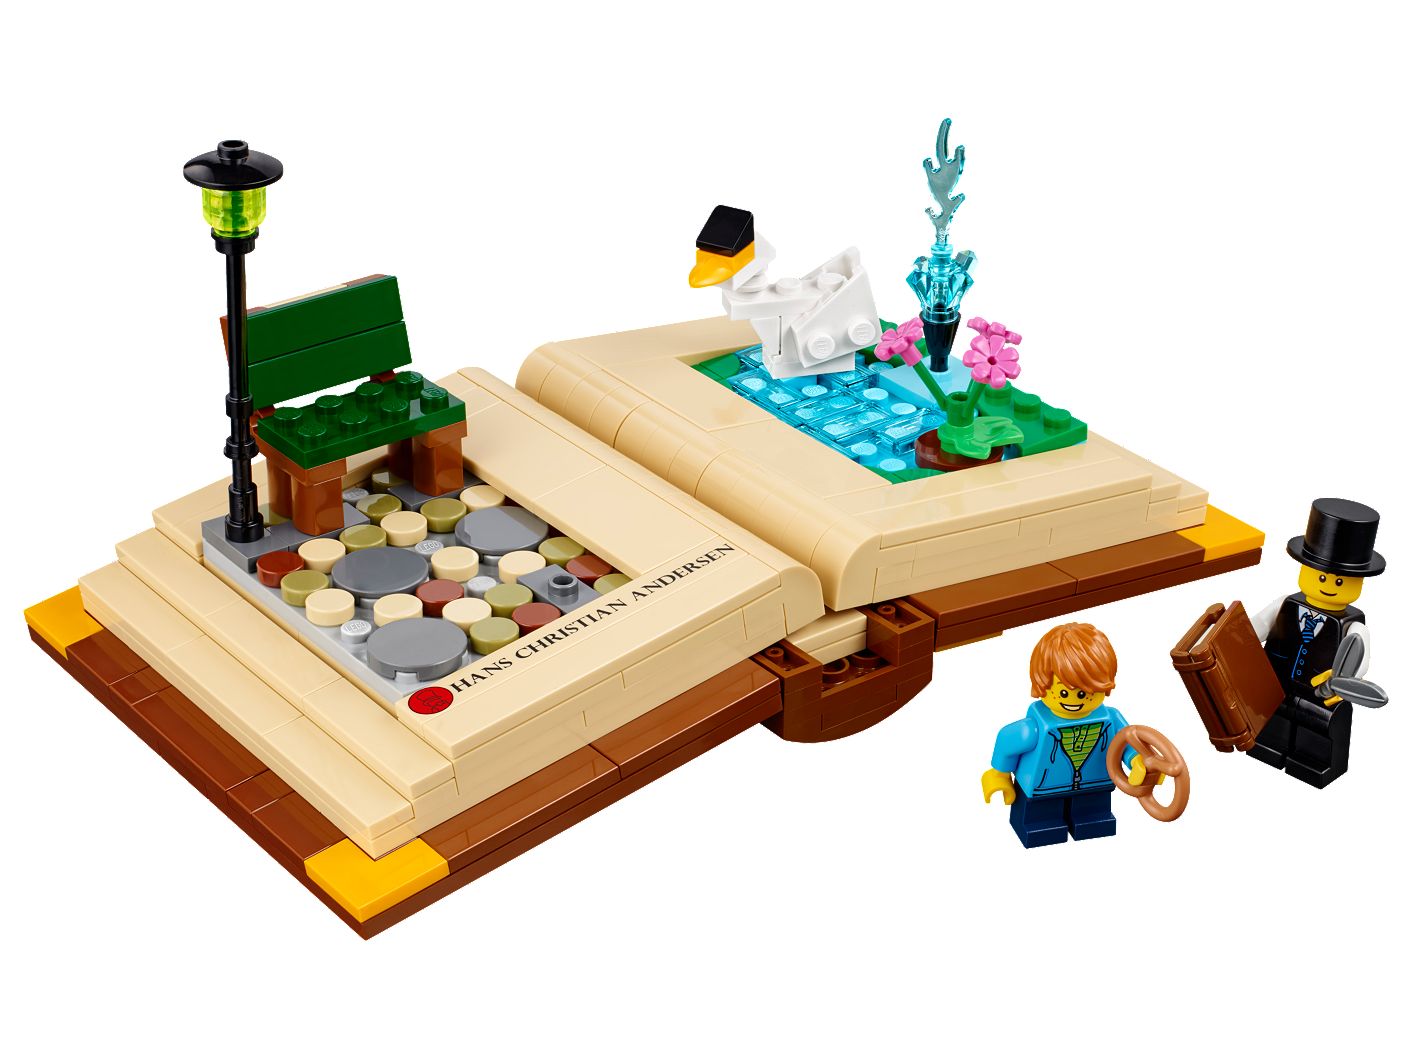 LEGOÂ® Creative Storybook 40291 | UNKNOWN | Buy online at the Official LEGOÂ® Shop US